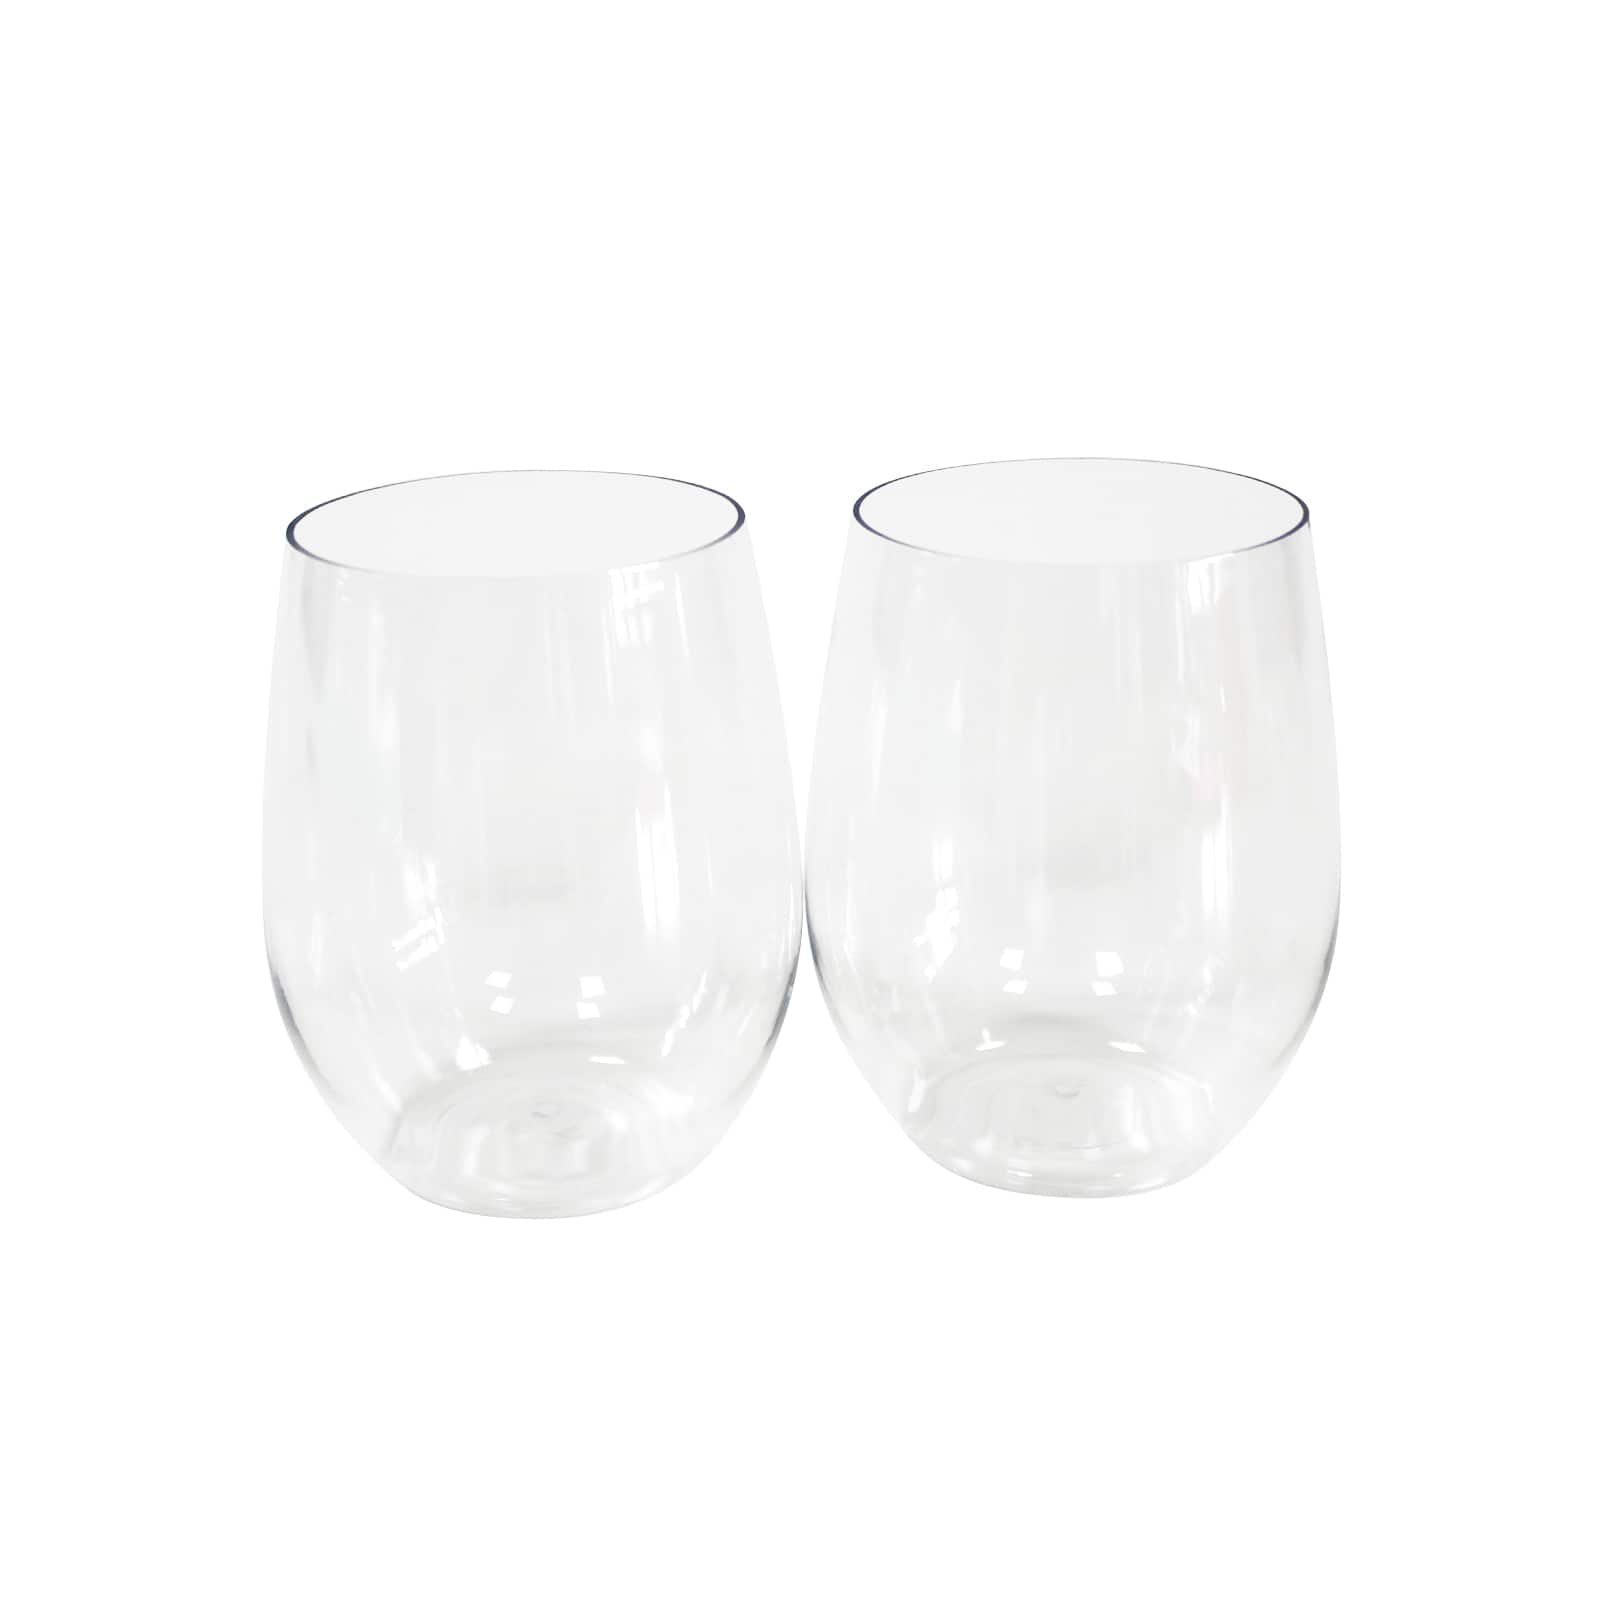 12 Packs: 20 ct. (240 total) 12oz. Stemless Wine Glasses by Celebrate It&#x2122;